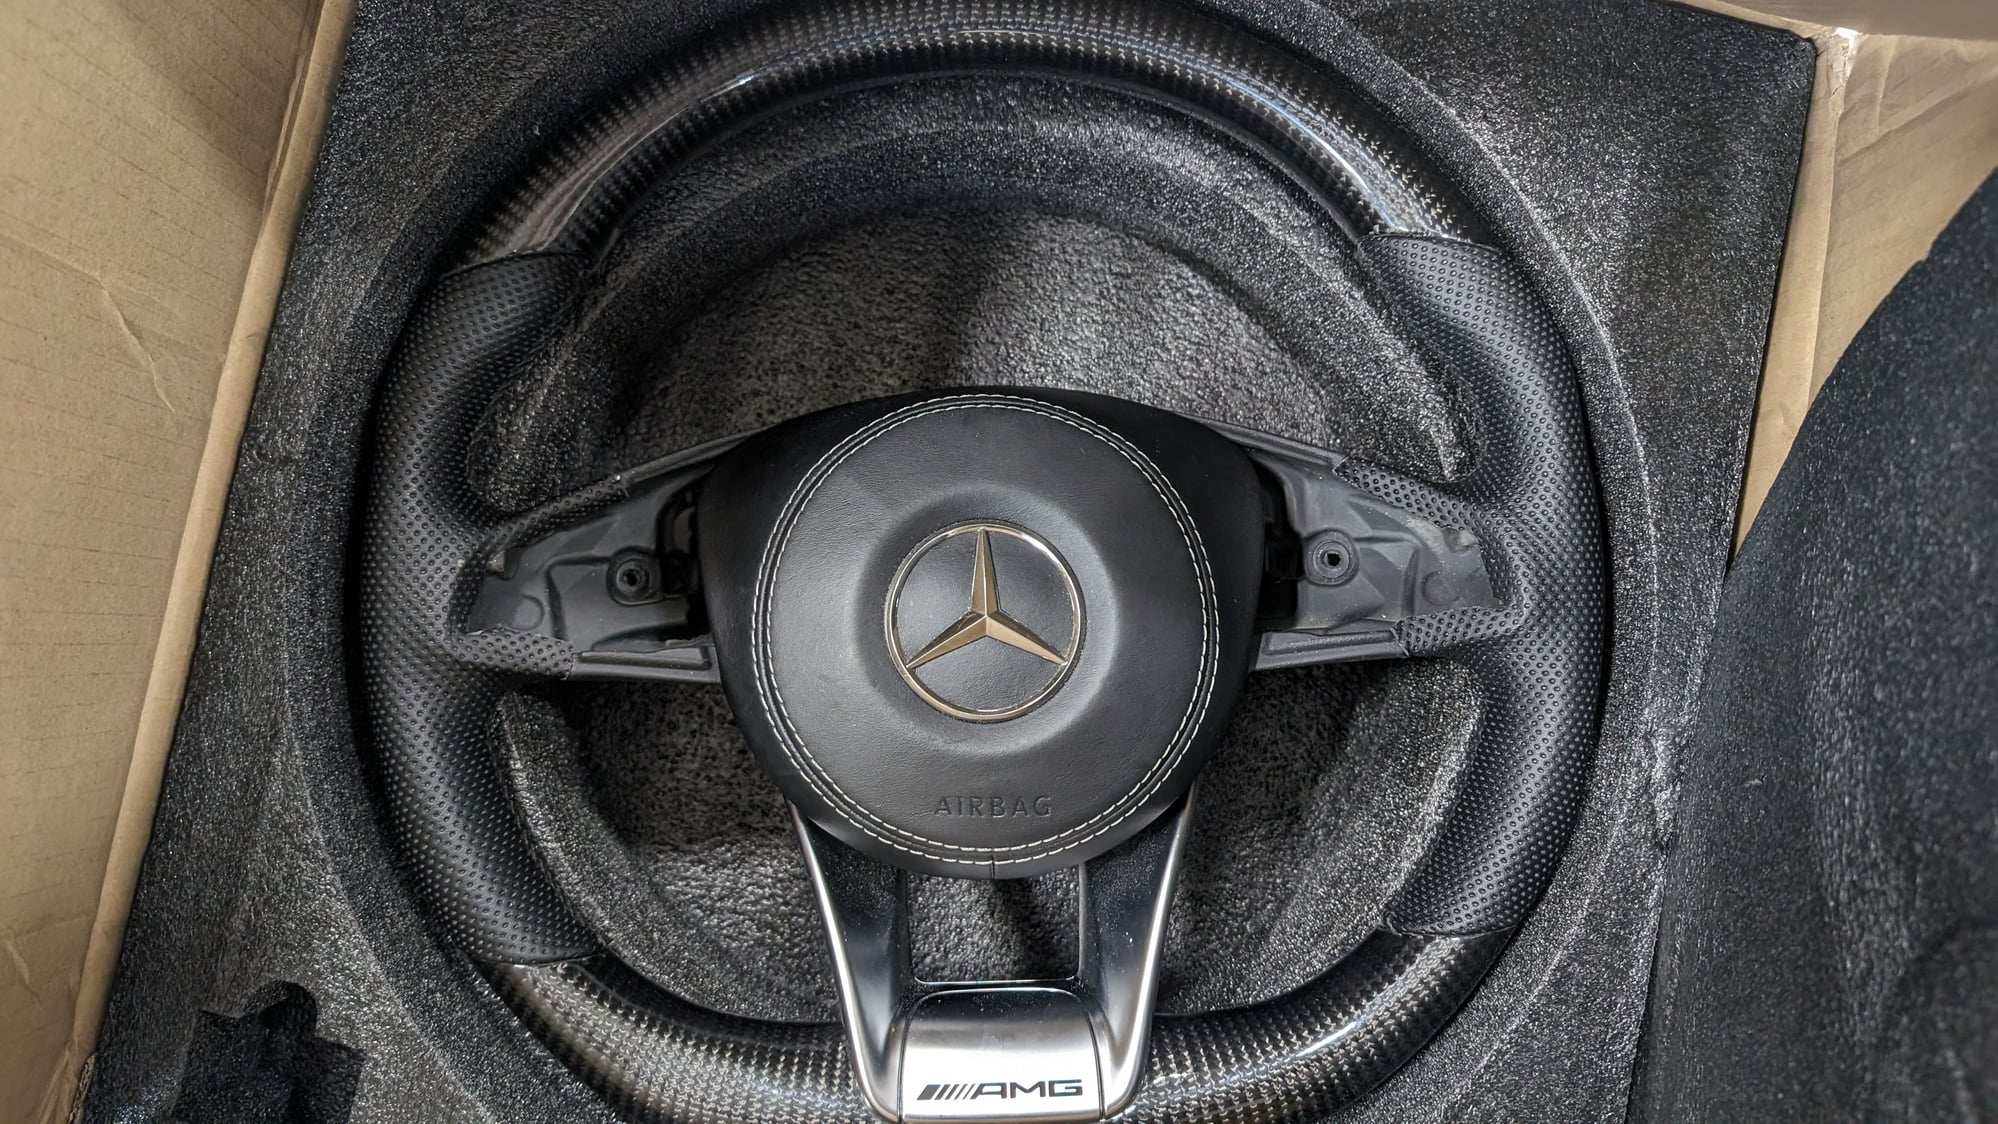 Interior/Upholstery - w205 Carbon Fiber Steering Wheel - Used - 2014 to 2021 Mercedes-Benz C-Class - Bentonville, AR 72712, United States